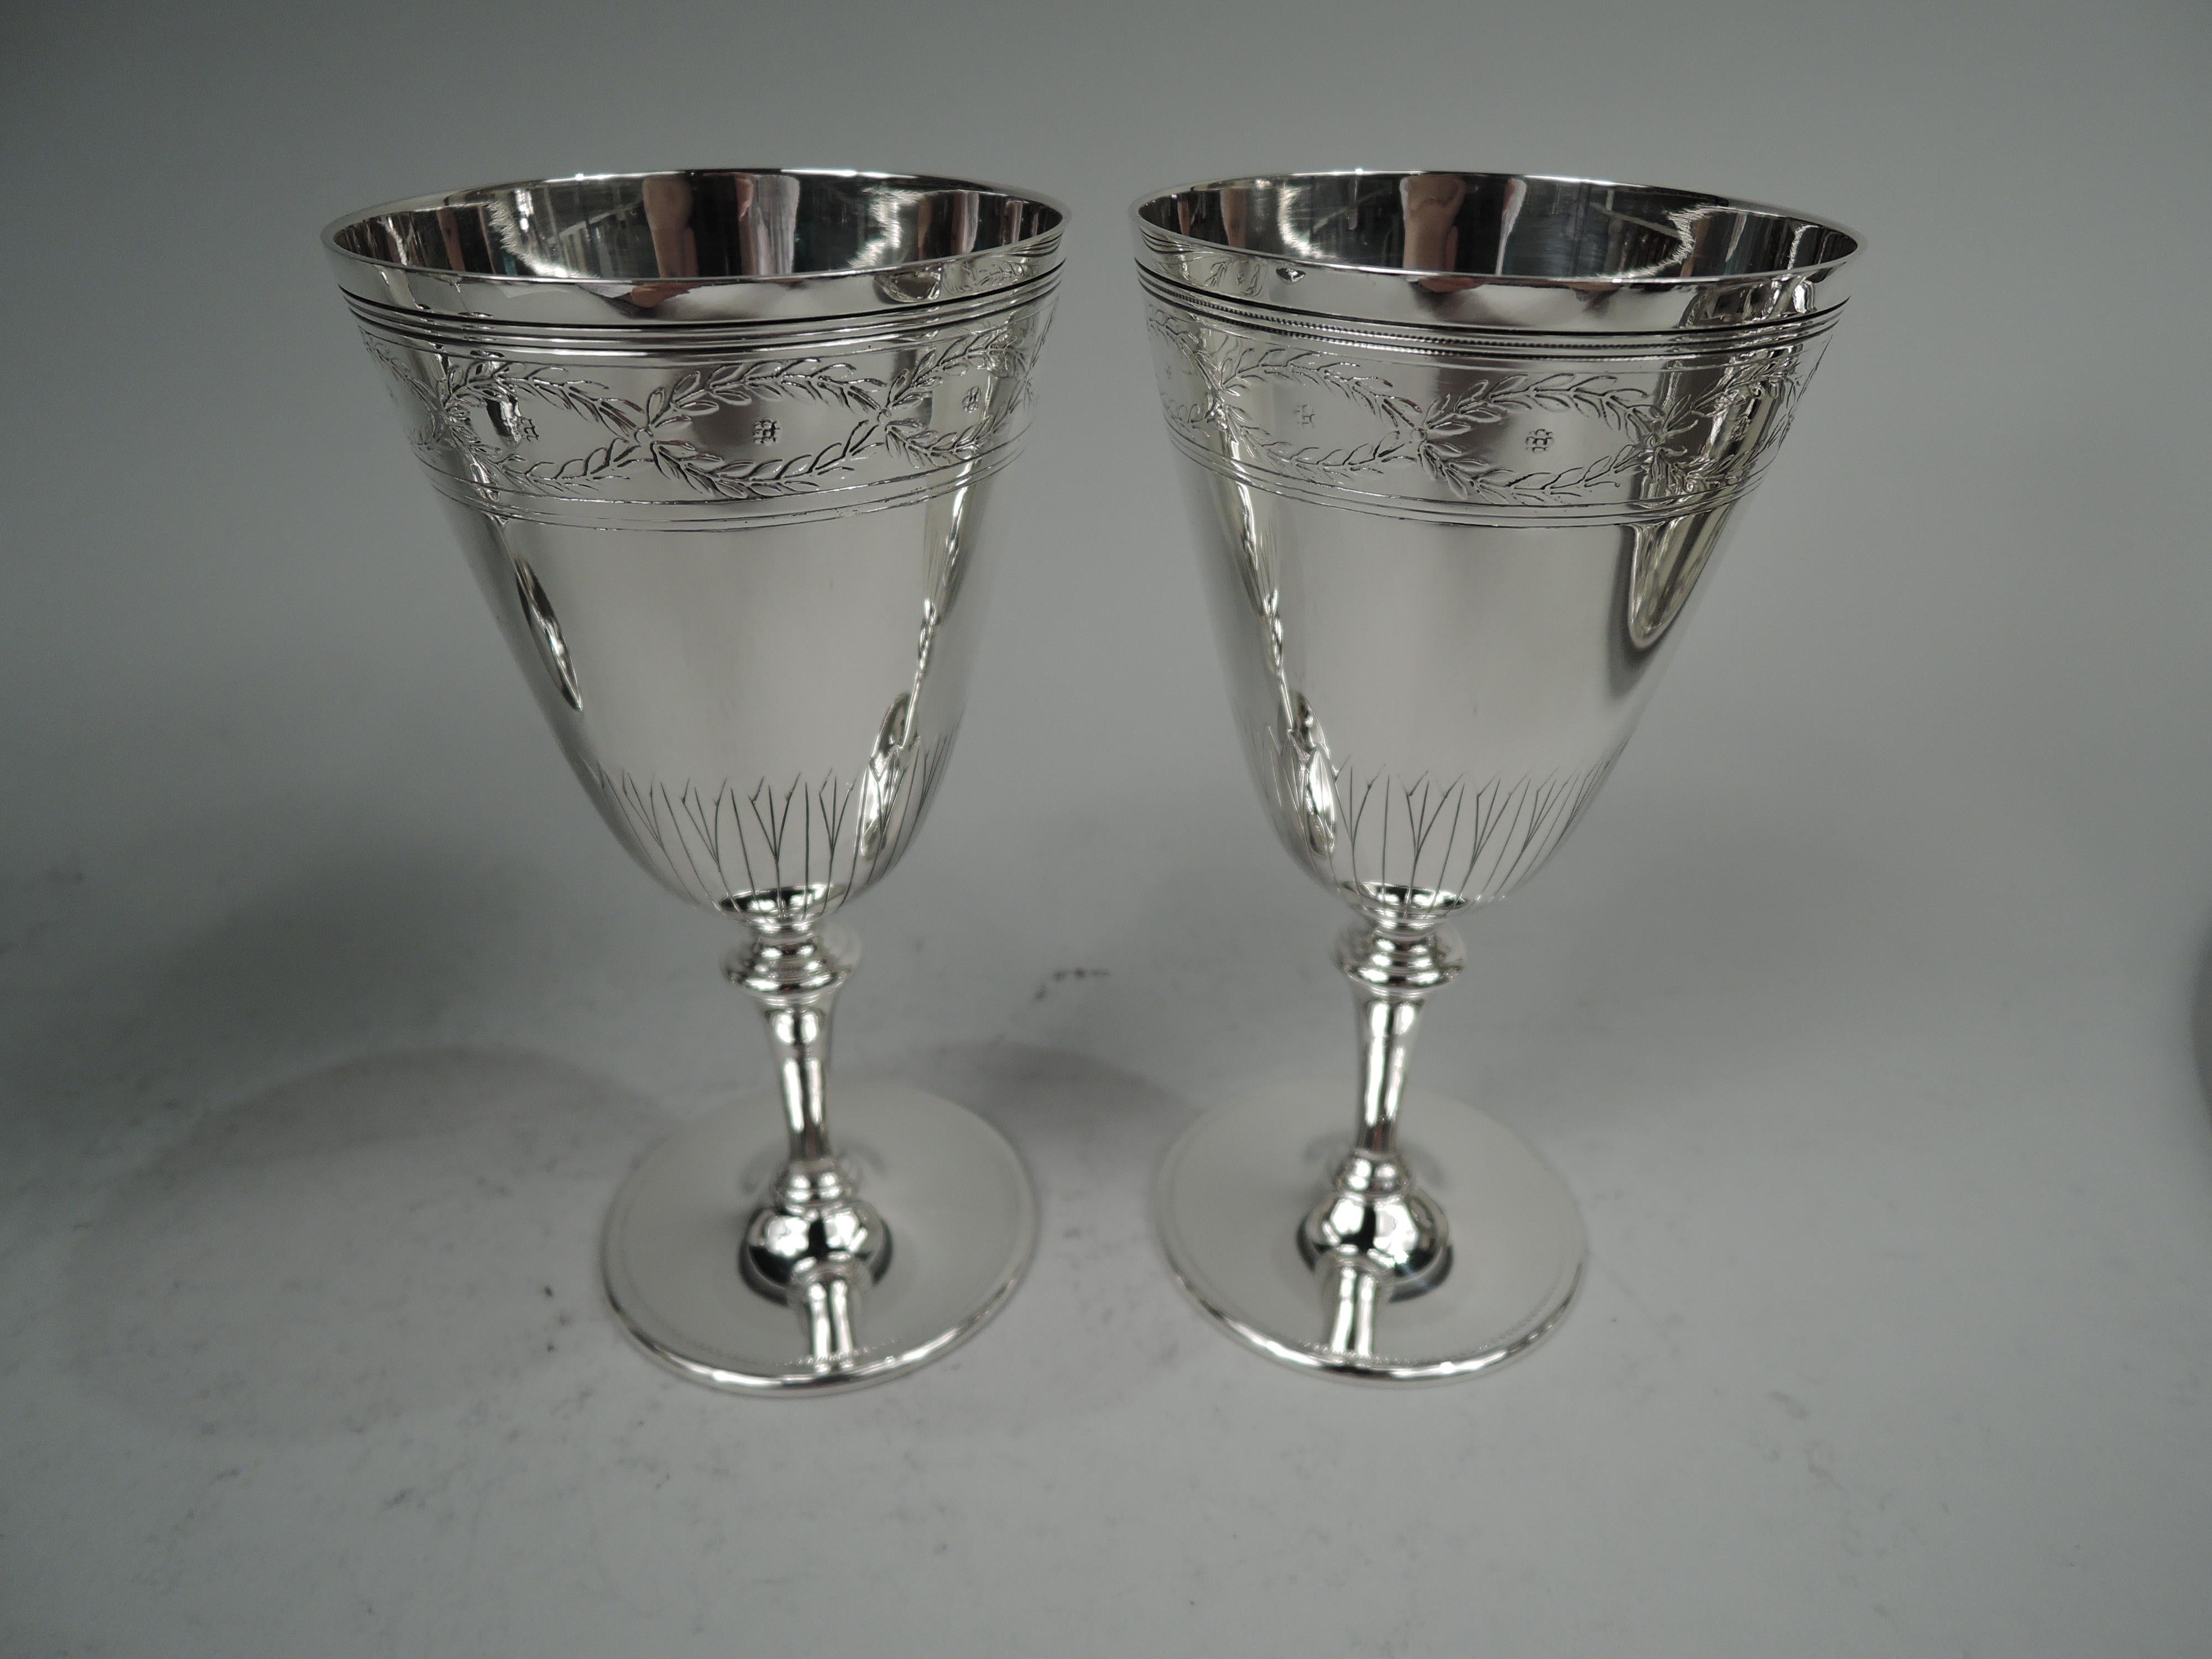 Tiffany Winthrop Drinks Set for 6 with Pitcher & Goblets on Tray For Sale 2